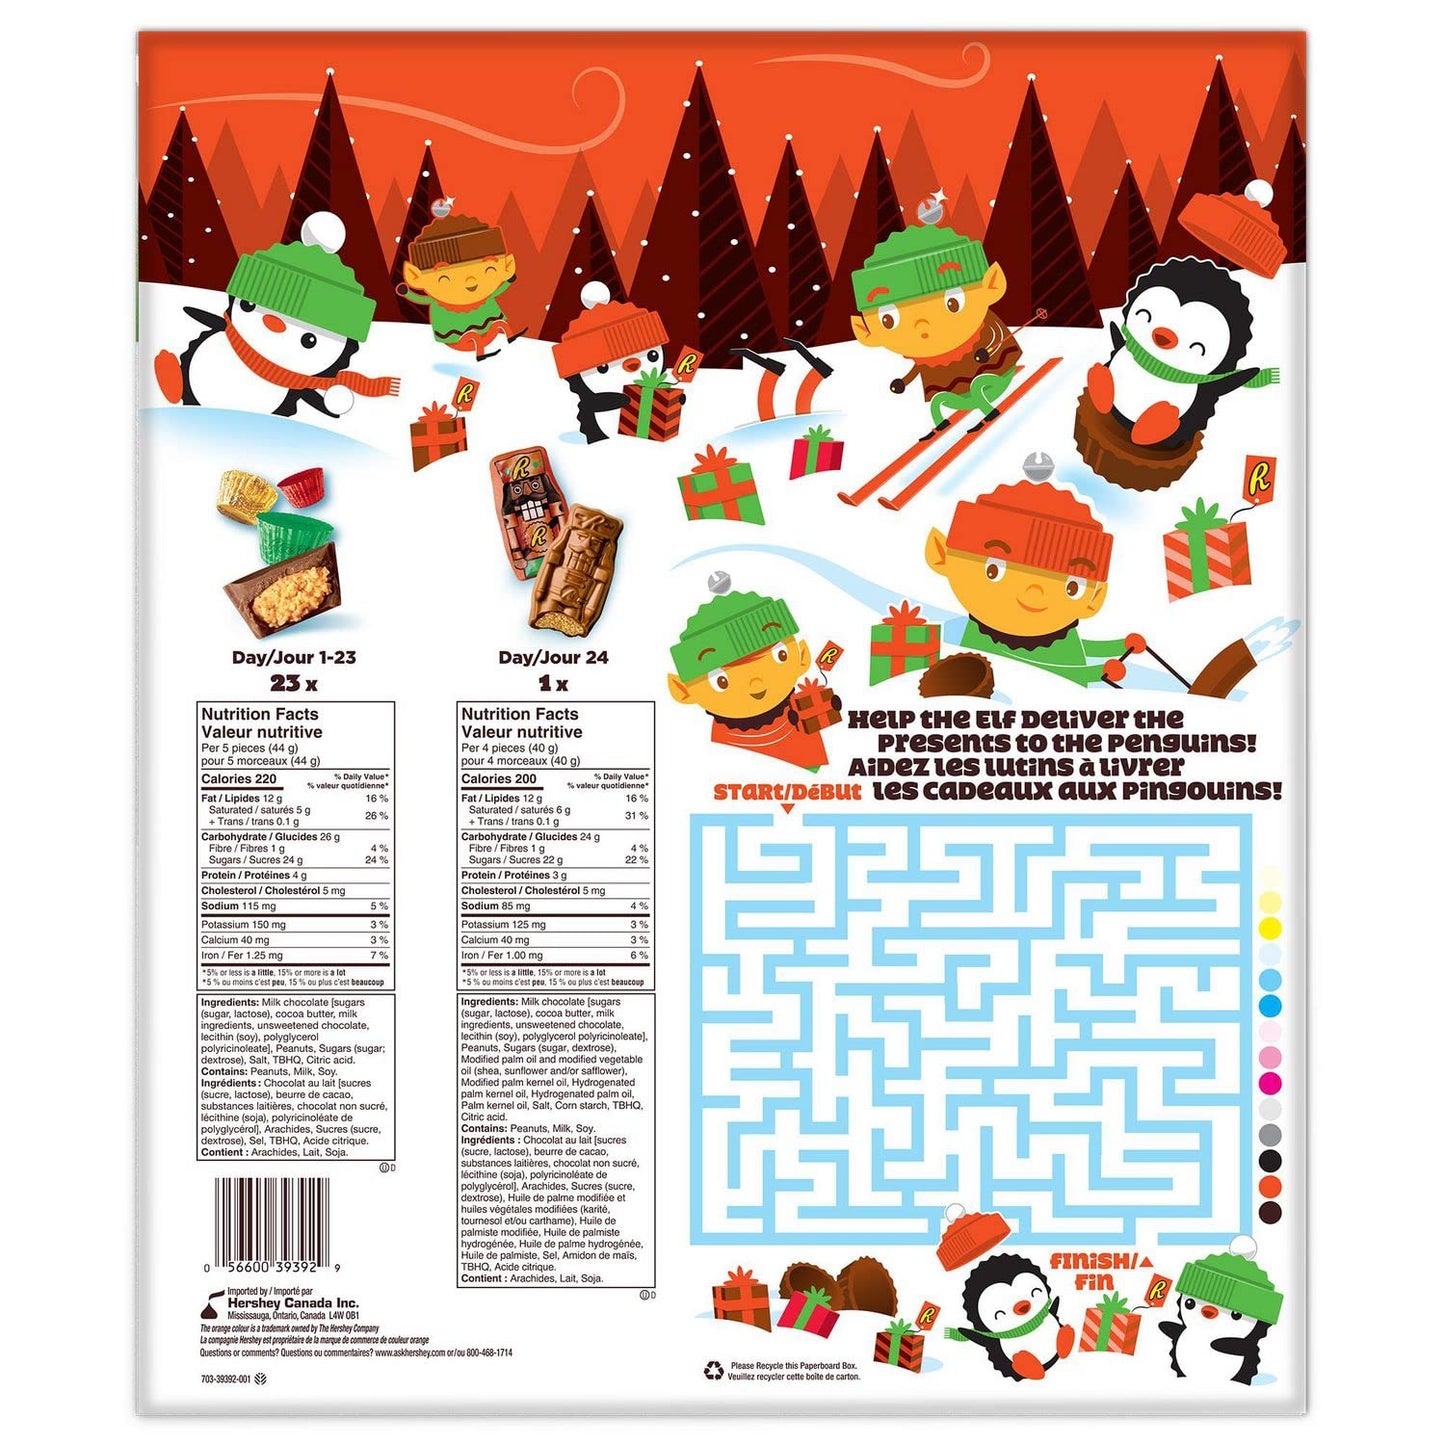 Peanut Butter & Milk Chocolate Advent Calendar Christmas Holiday 212g/7.4oz (Shipped from Canada)